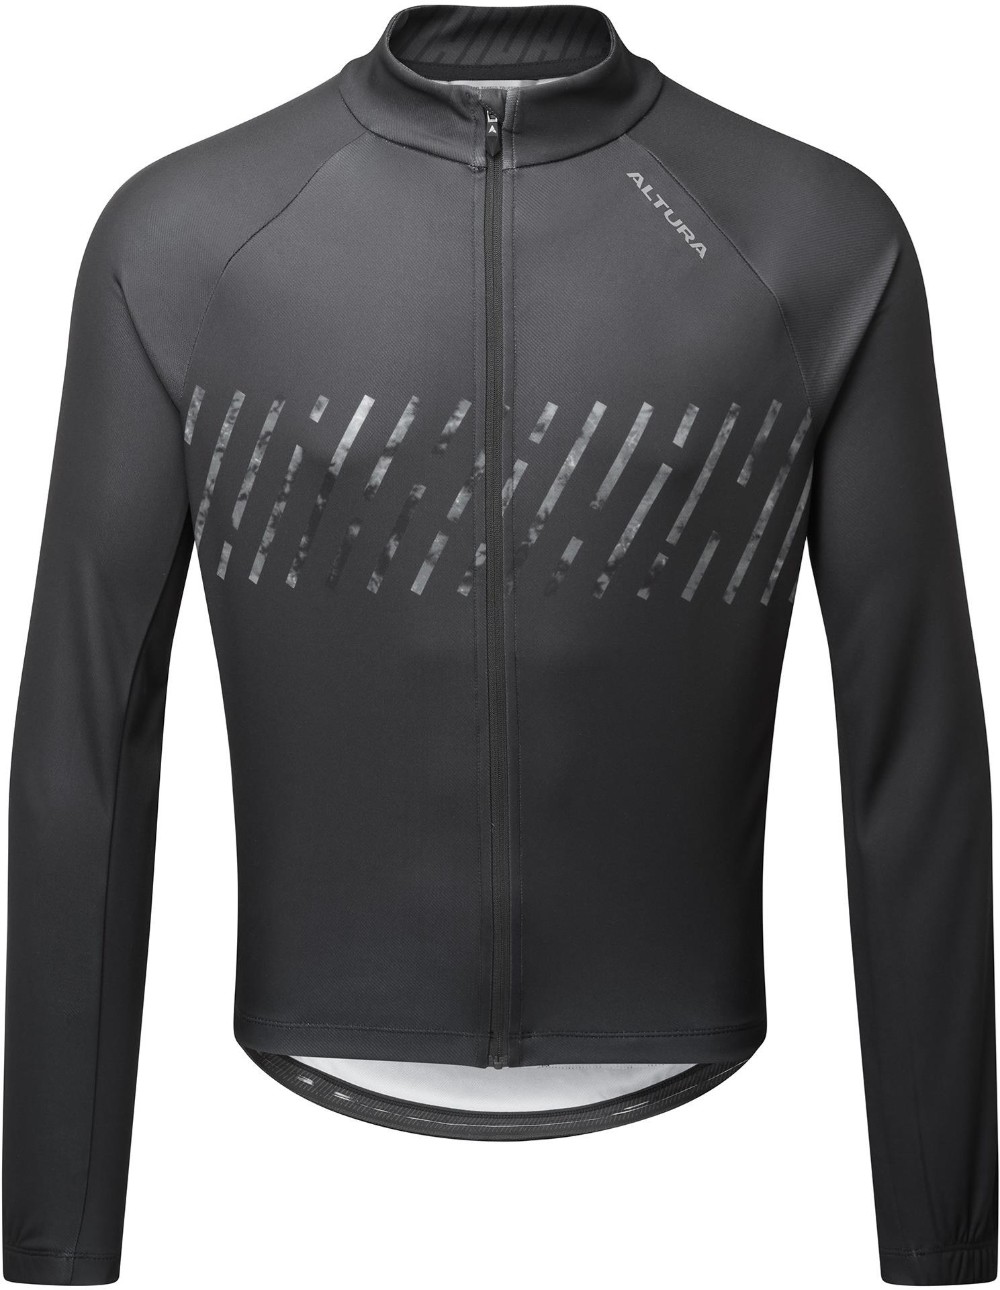 Airstream Long Sleeve Jersey image 2